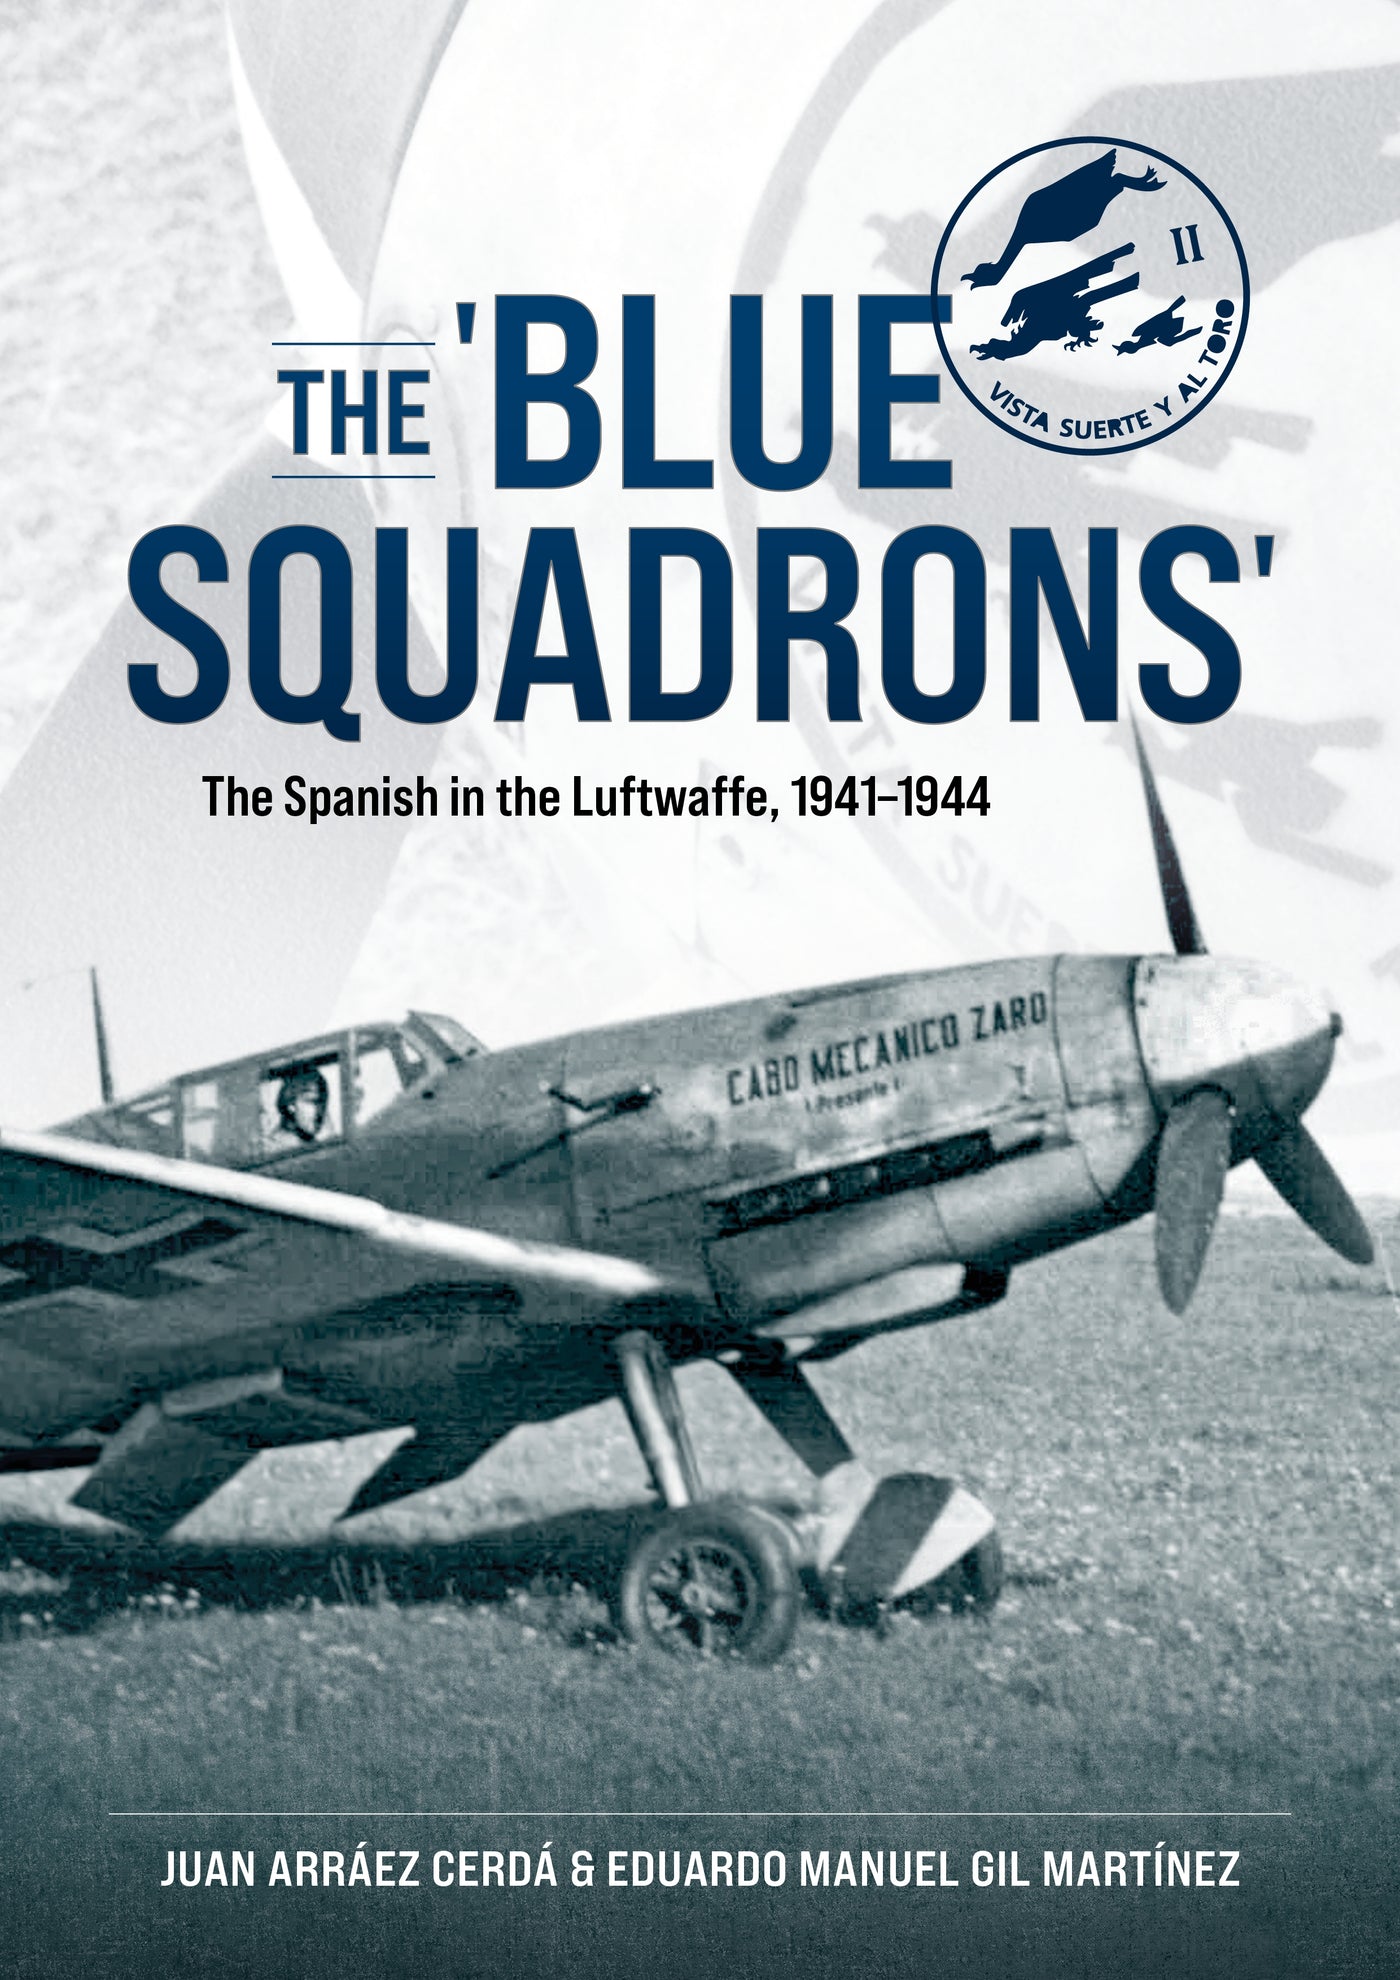 The 'Blue Squadrons'